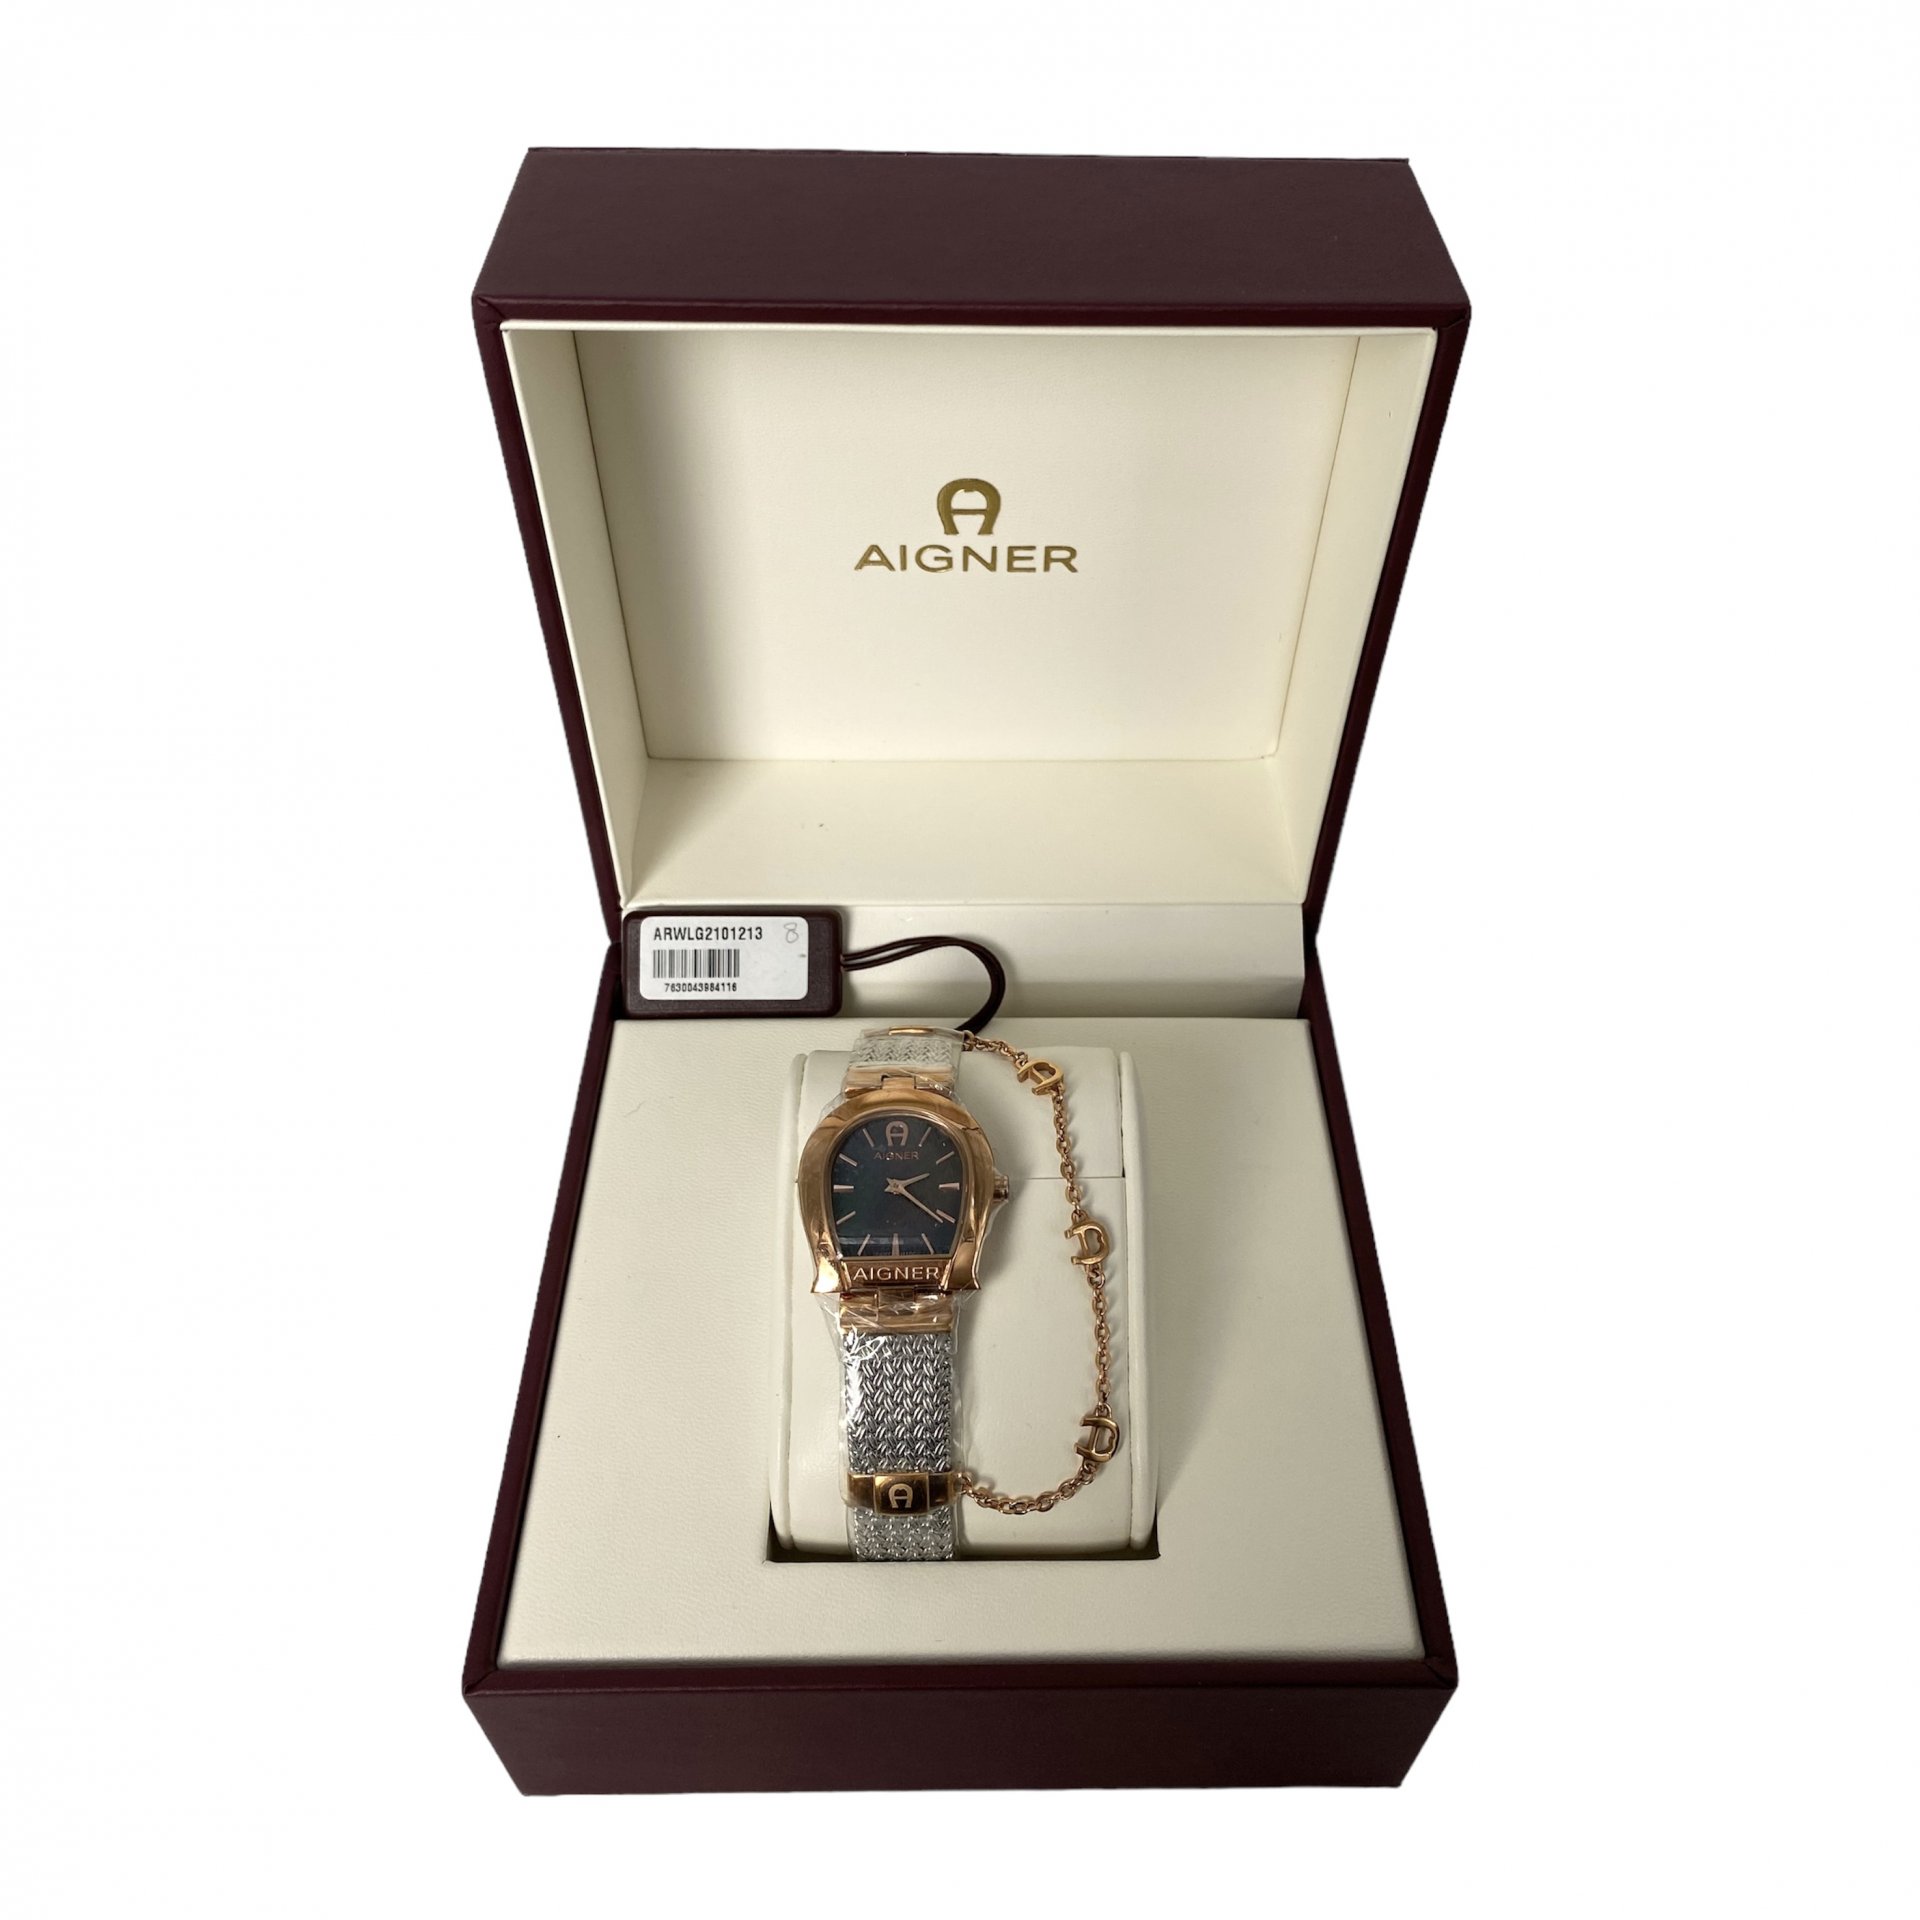 Aigner Cremona Nuovo Watch ARWLG2101213 Black Dial